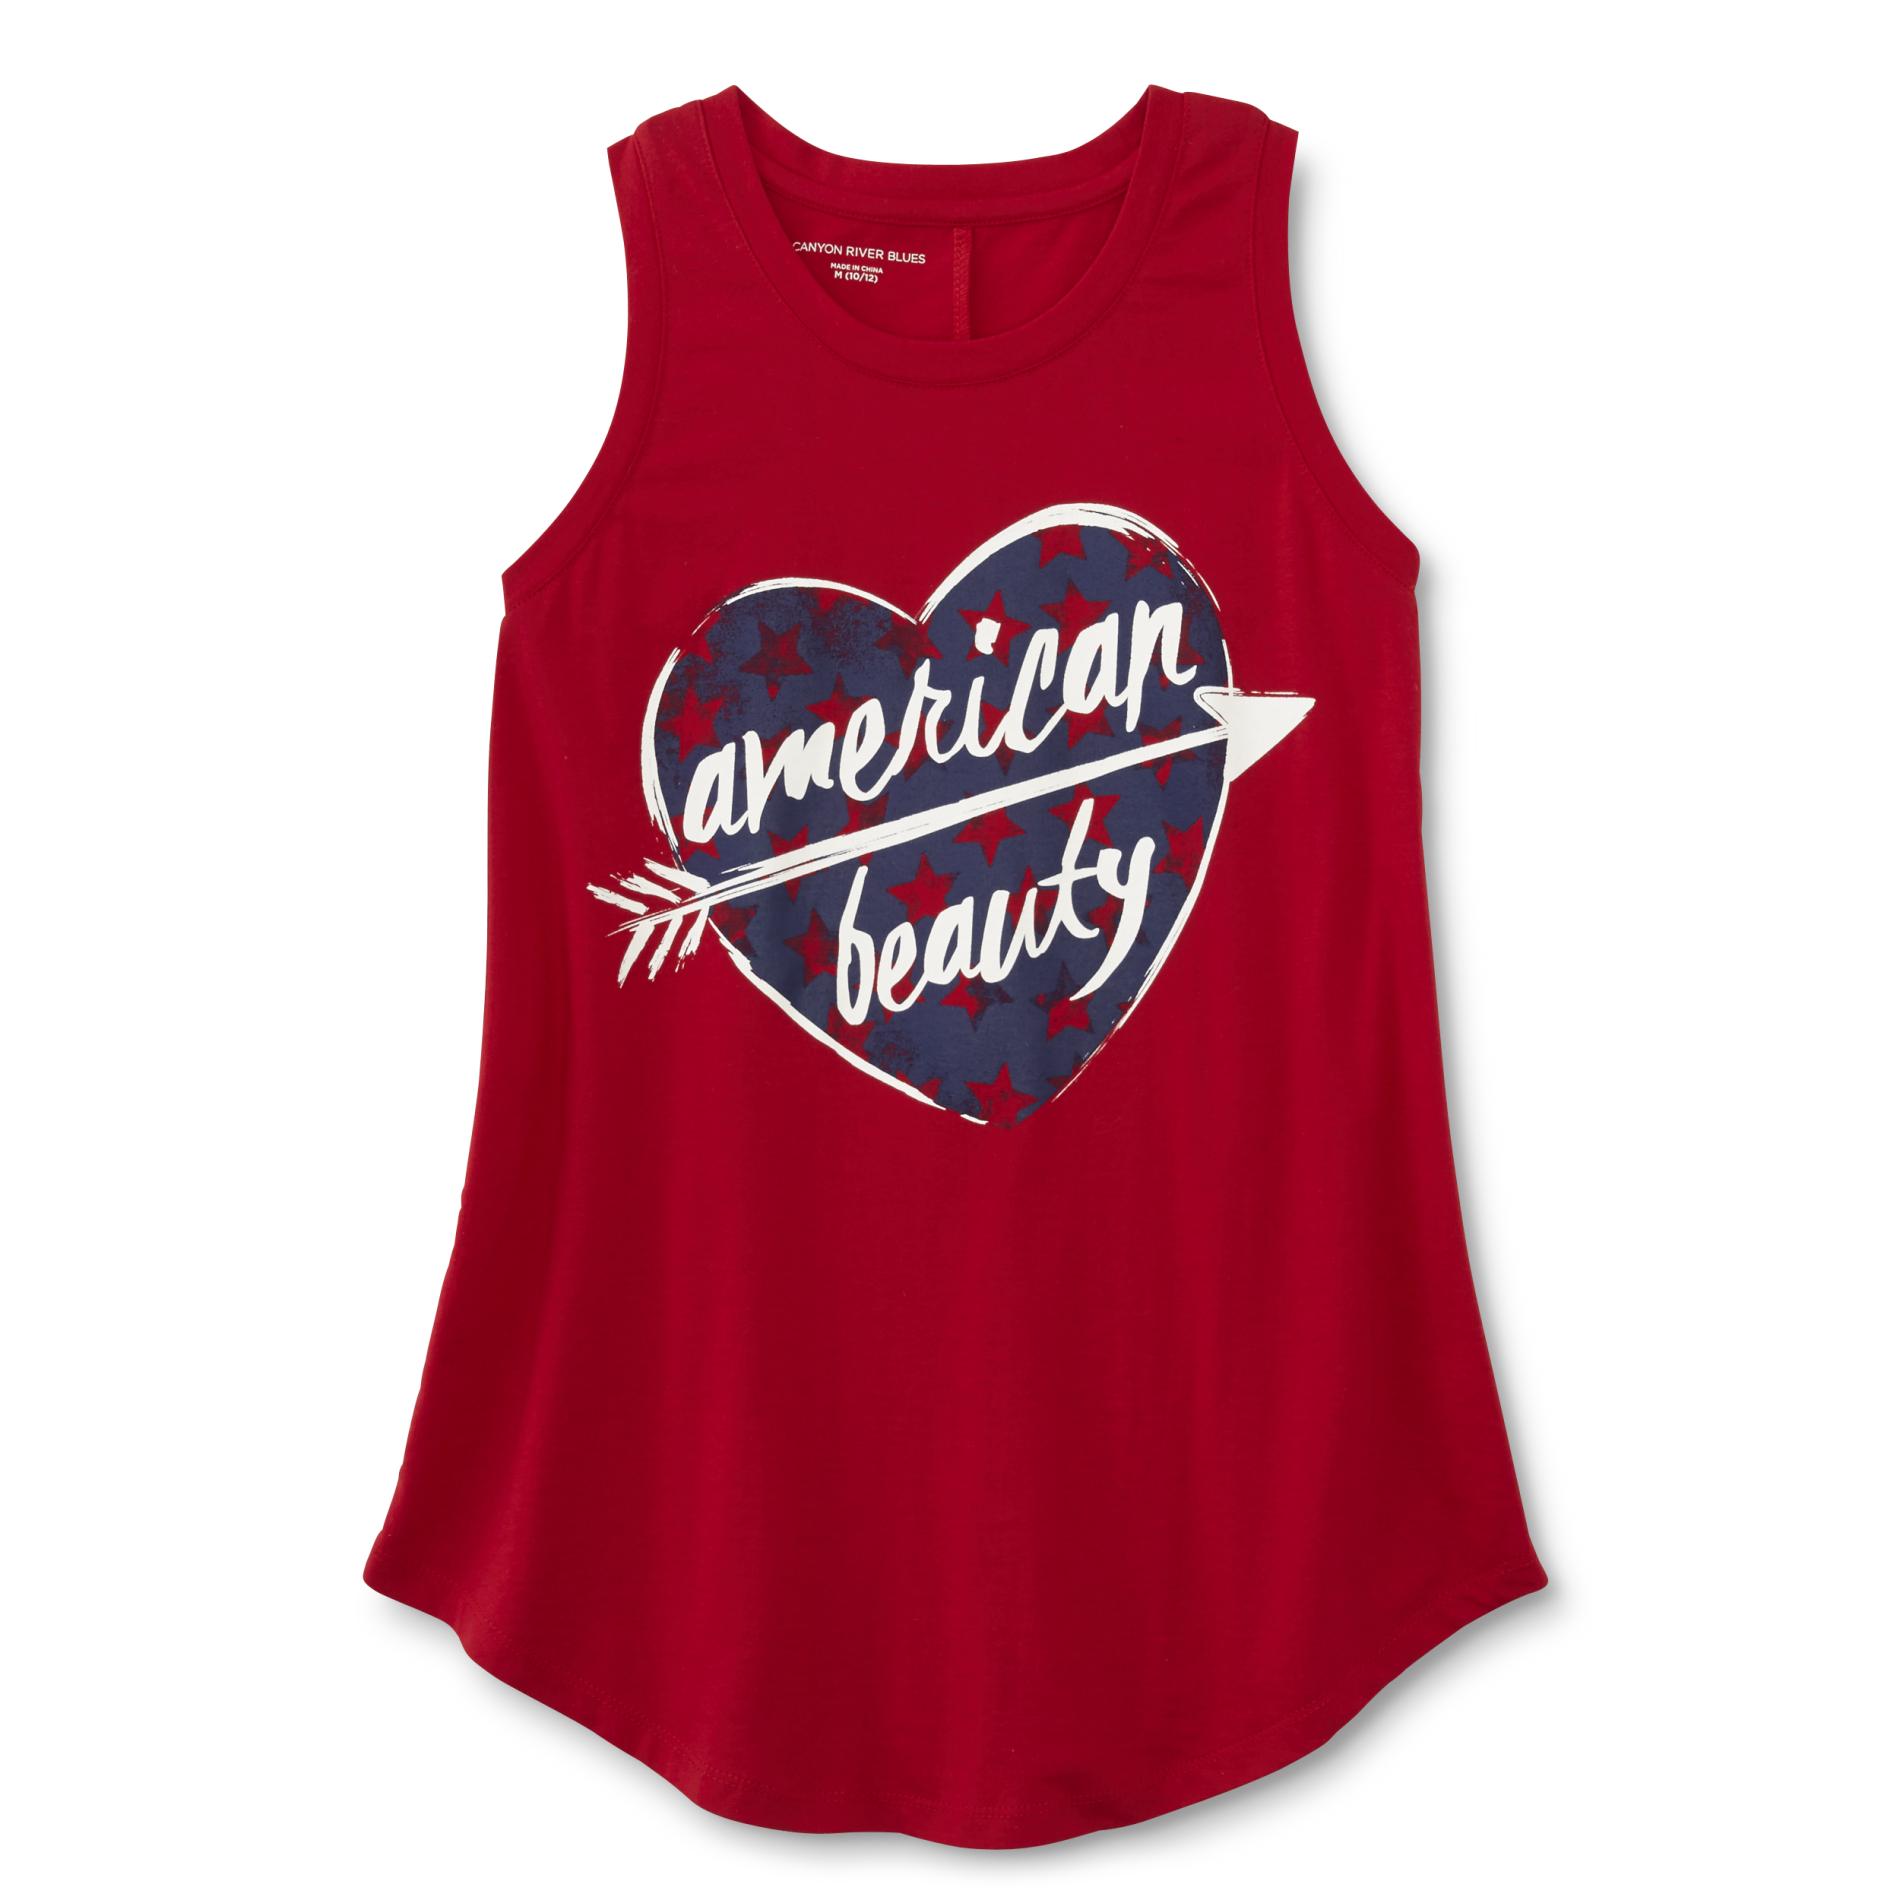 Girl's Graphic Tank Top - American Beauty